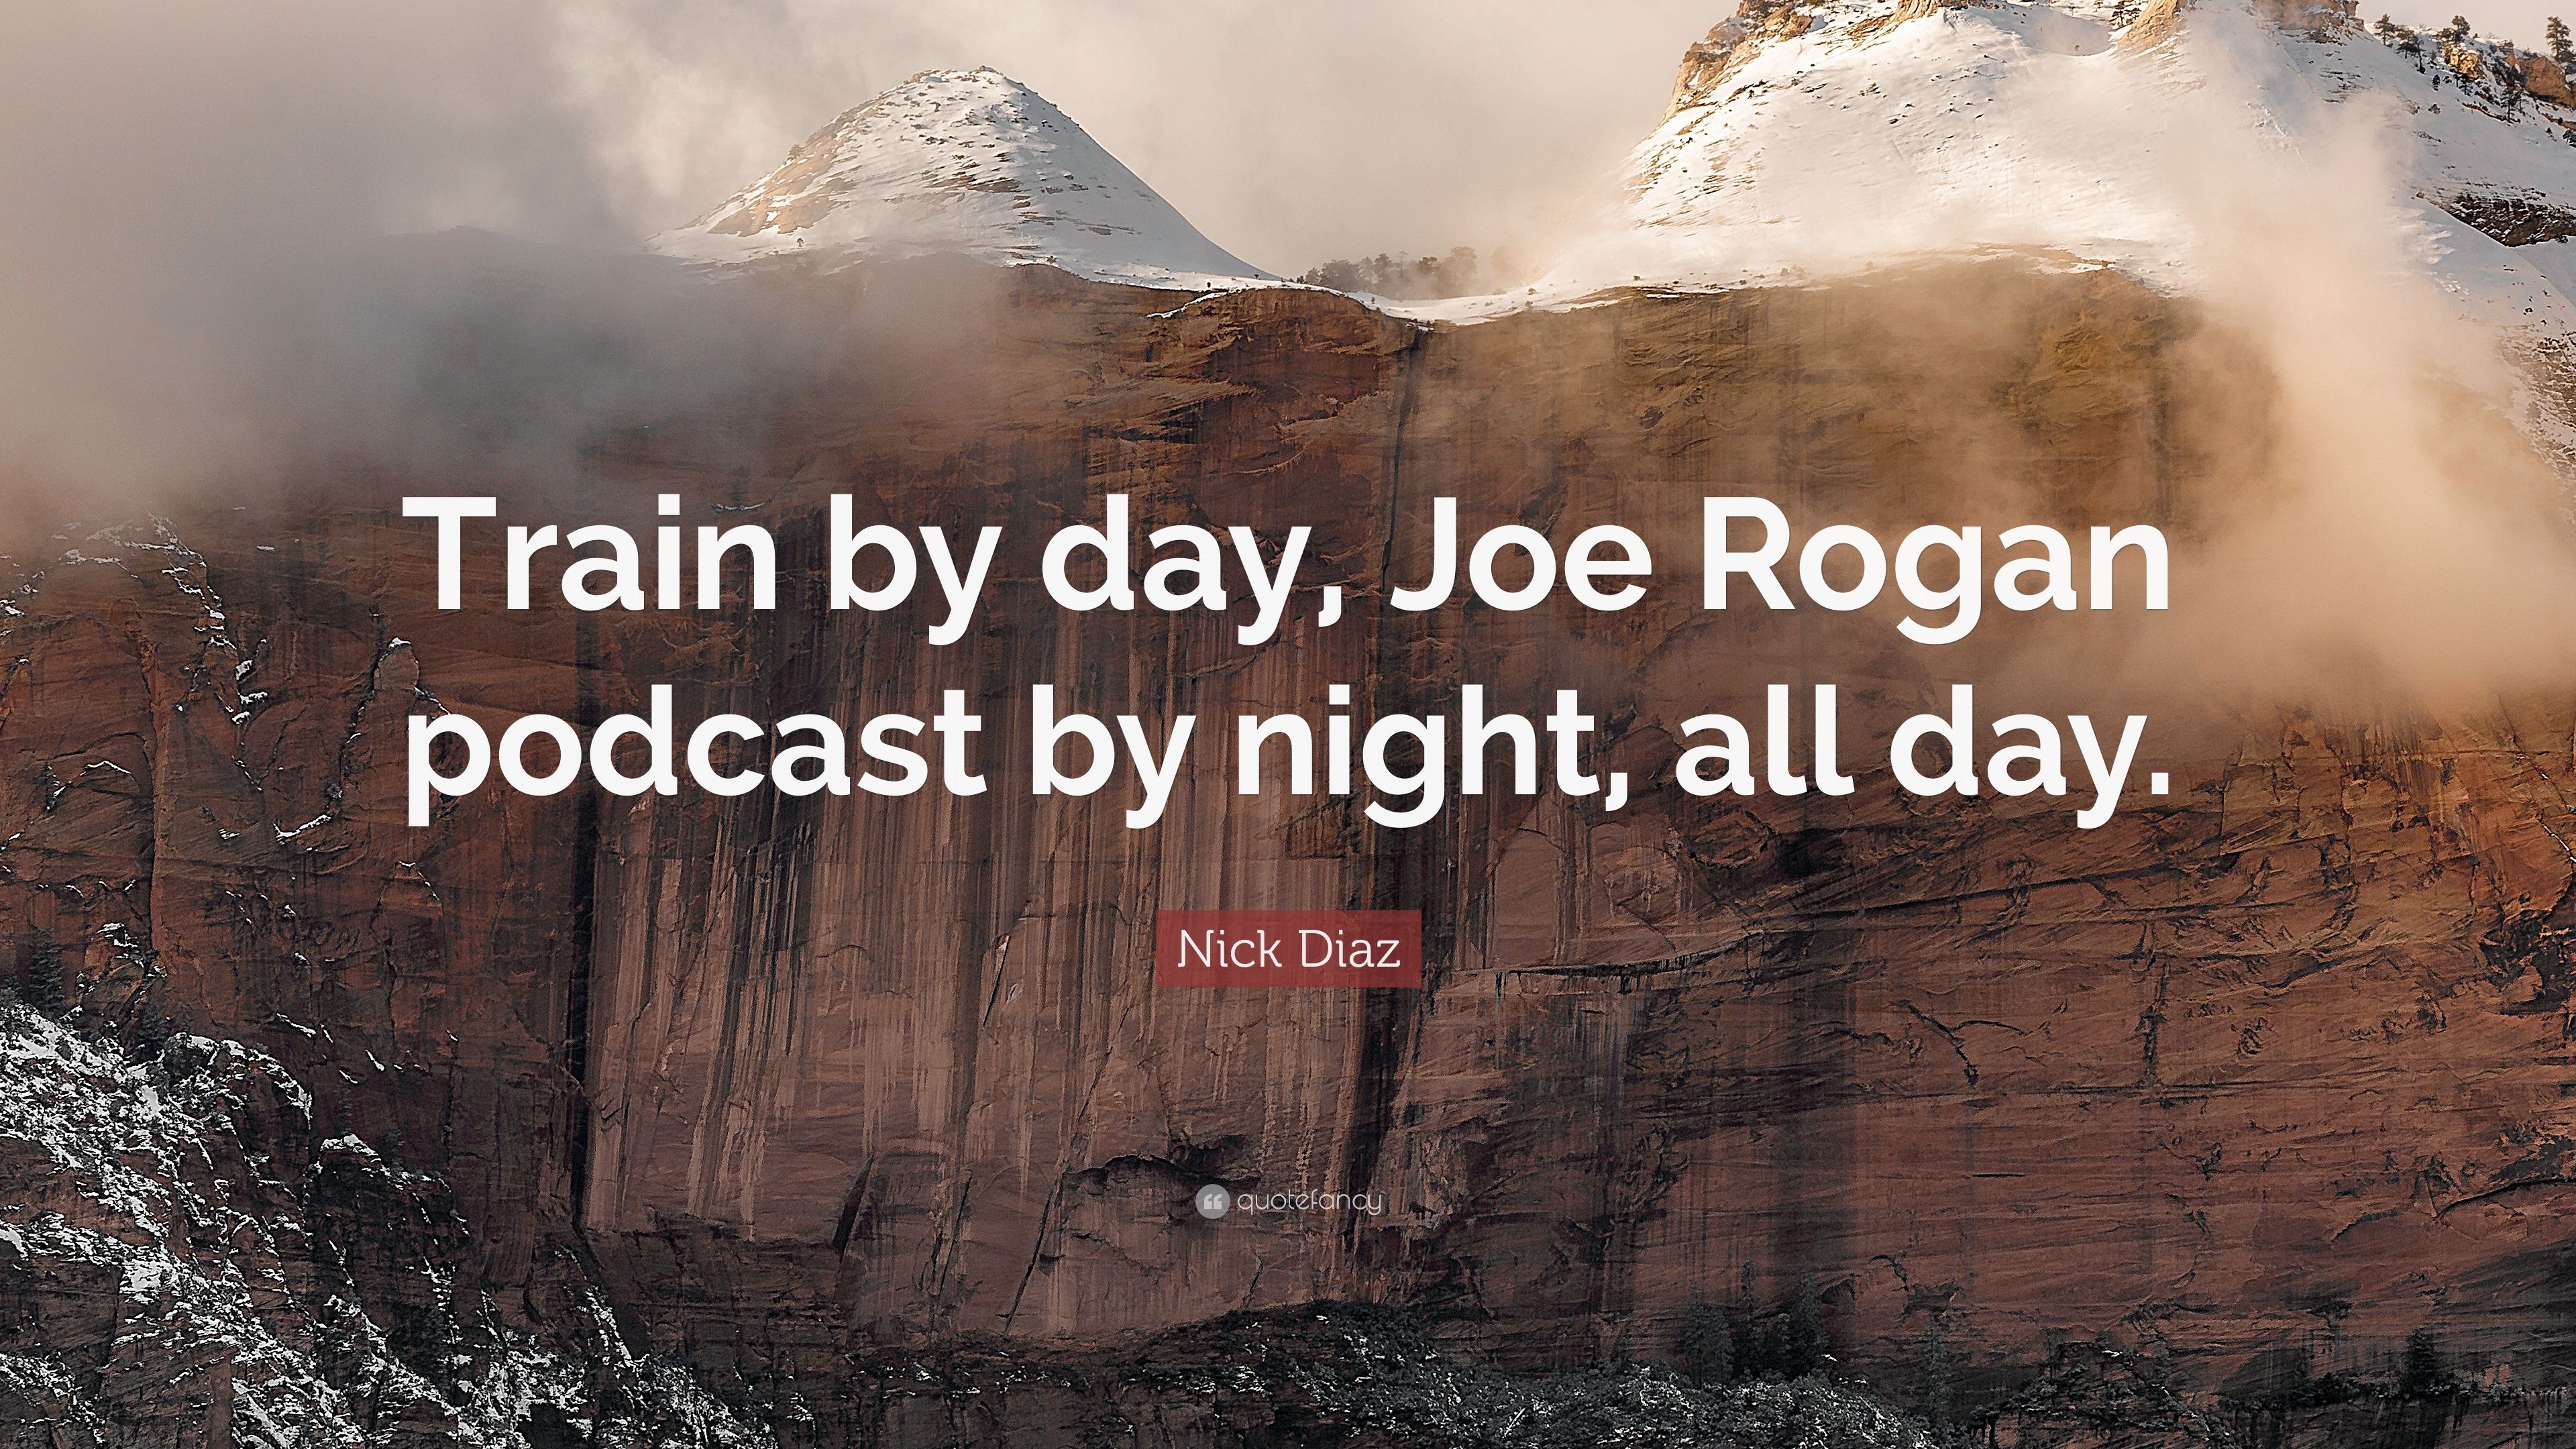 Nick Diaz Quote: “Train by day, Joe Rogan podcast by night, all